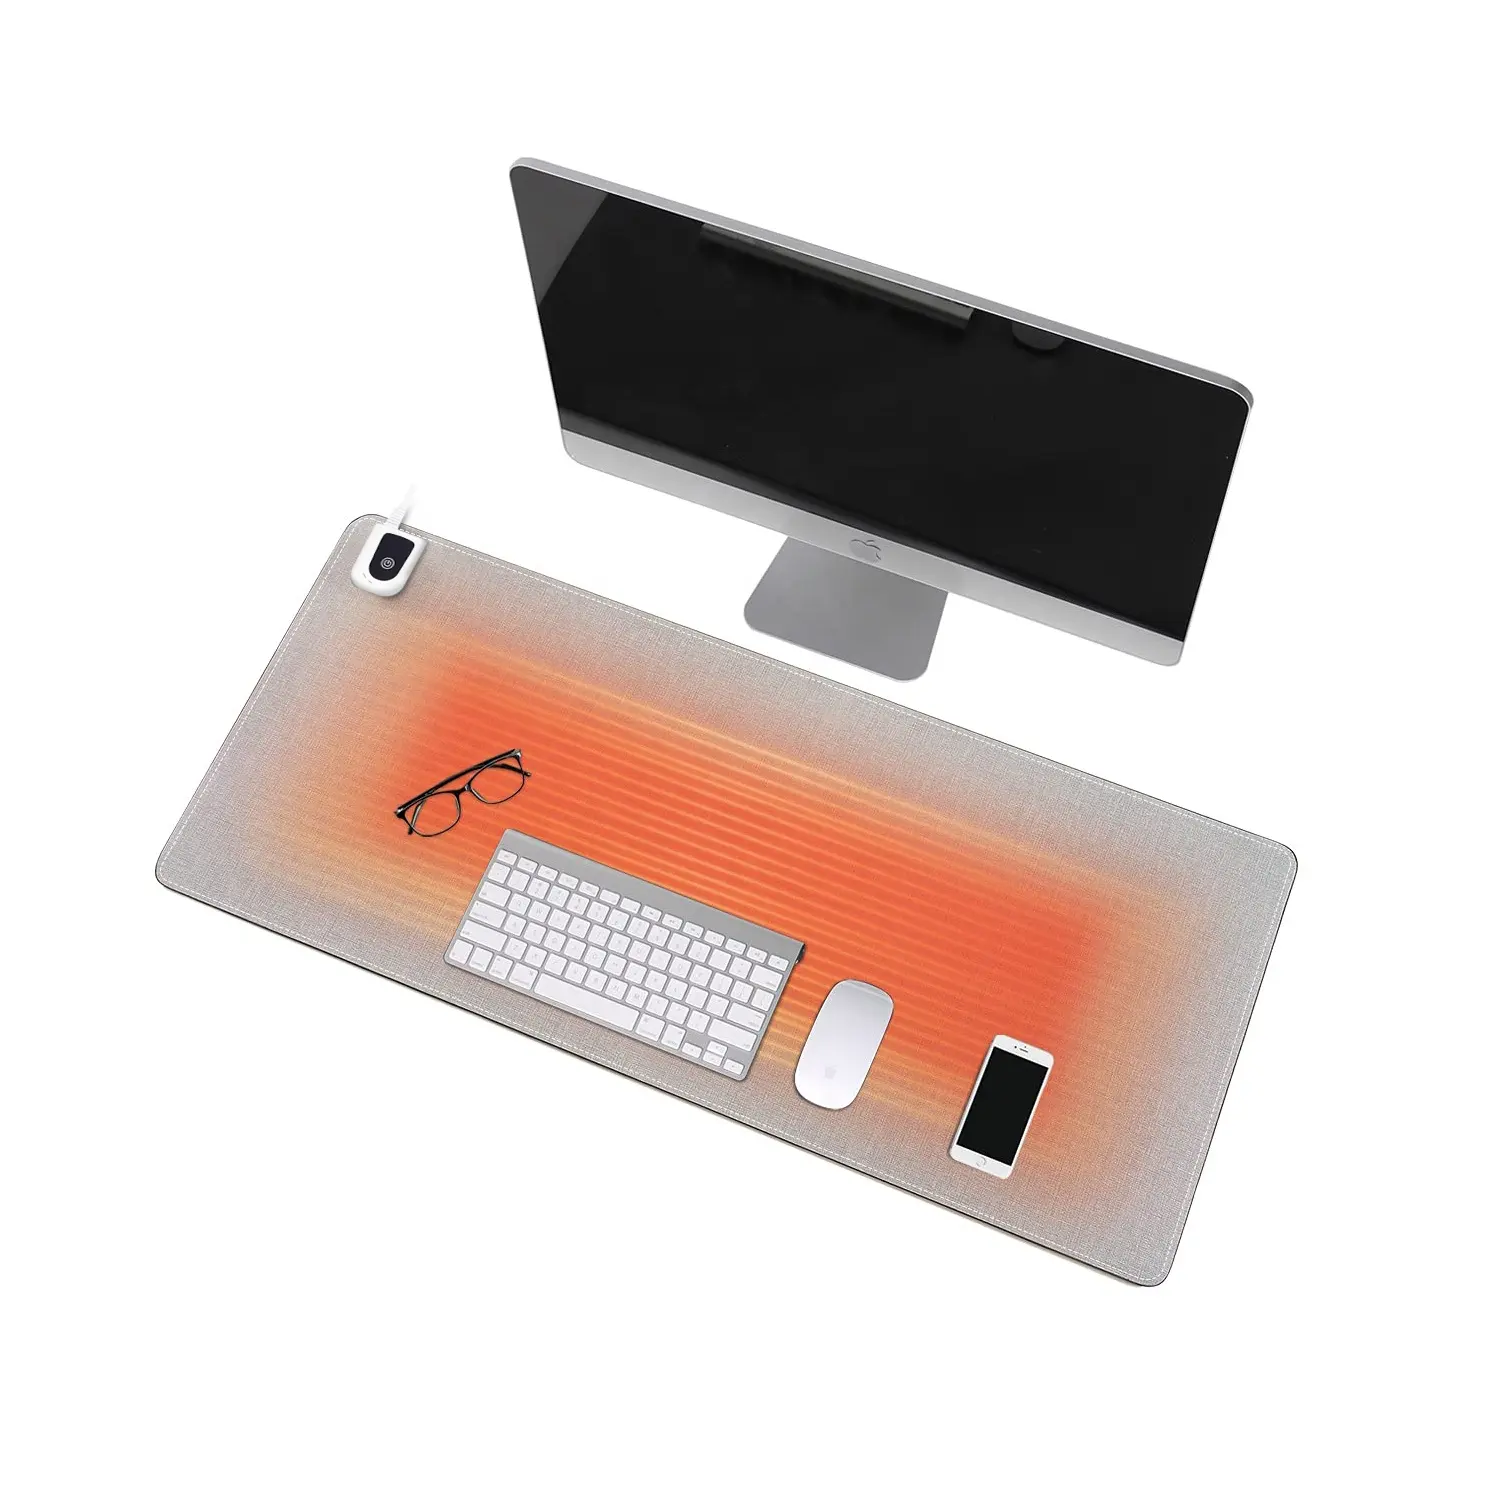 Heated Mouse Pad Electric Warm Desk Pad 31.5" x 13" Large Safe Desk Mat Hand Warmer for Computer Keyboard